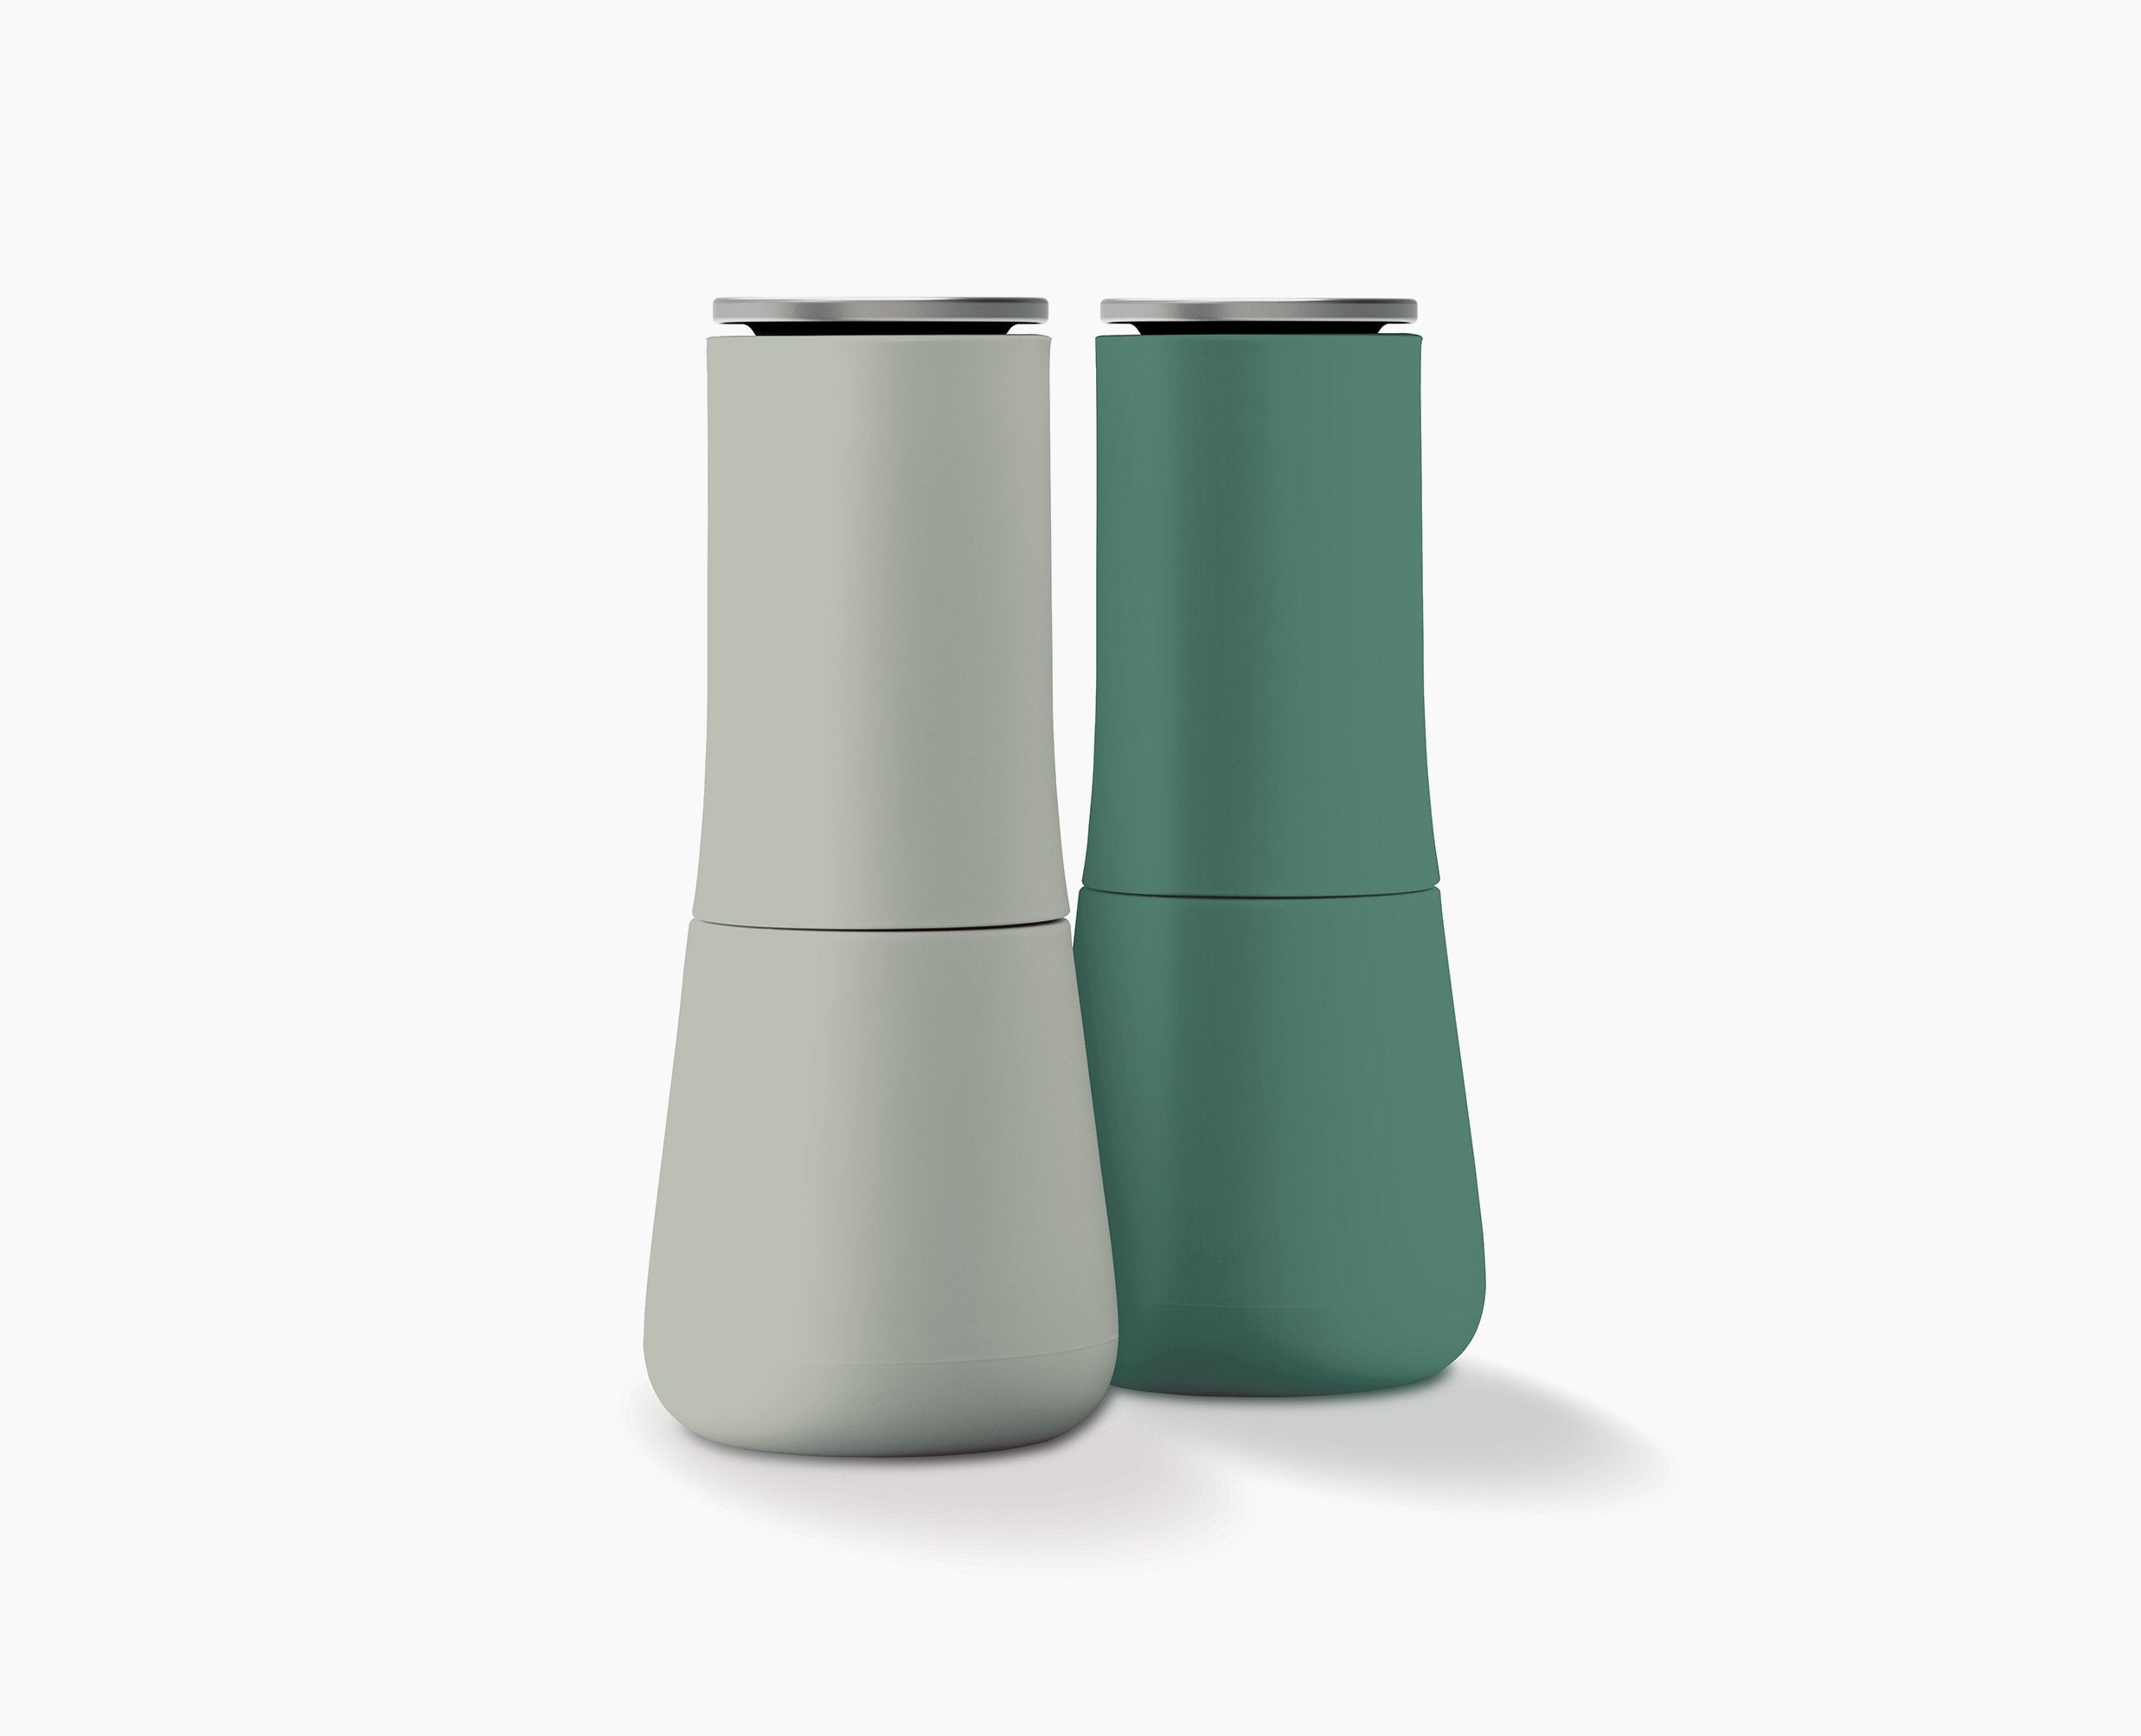 BEON.COM.AU Product Details Create a statement piece on your counter top with our Milltop™ Salt & Pepper Mills now available in the hues of green of our Editions range. The clever design of these elegant salt and pepper mills means the grinding mechanism is at the top so any excess grounds fall back insi... Joseph Joseph at BEON.COM.AU